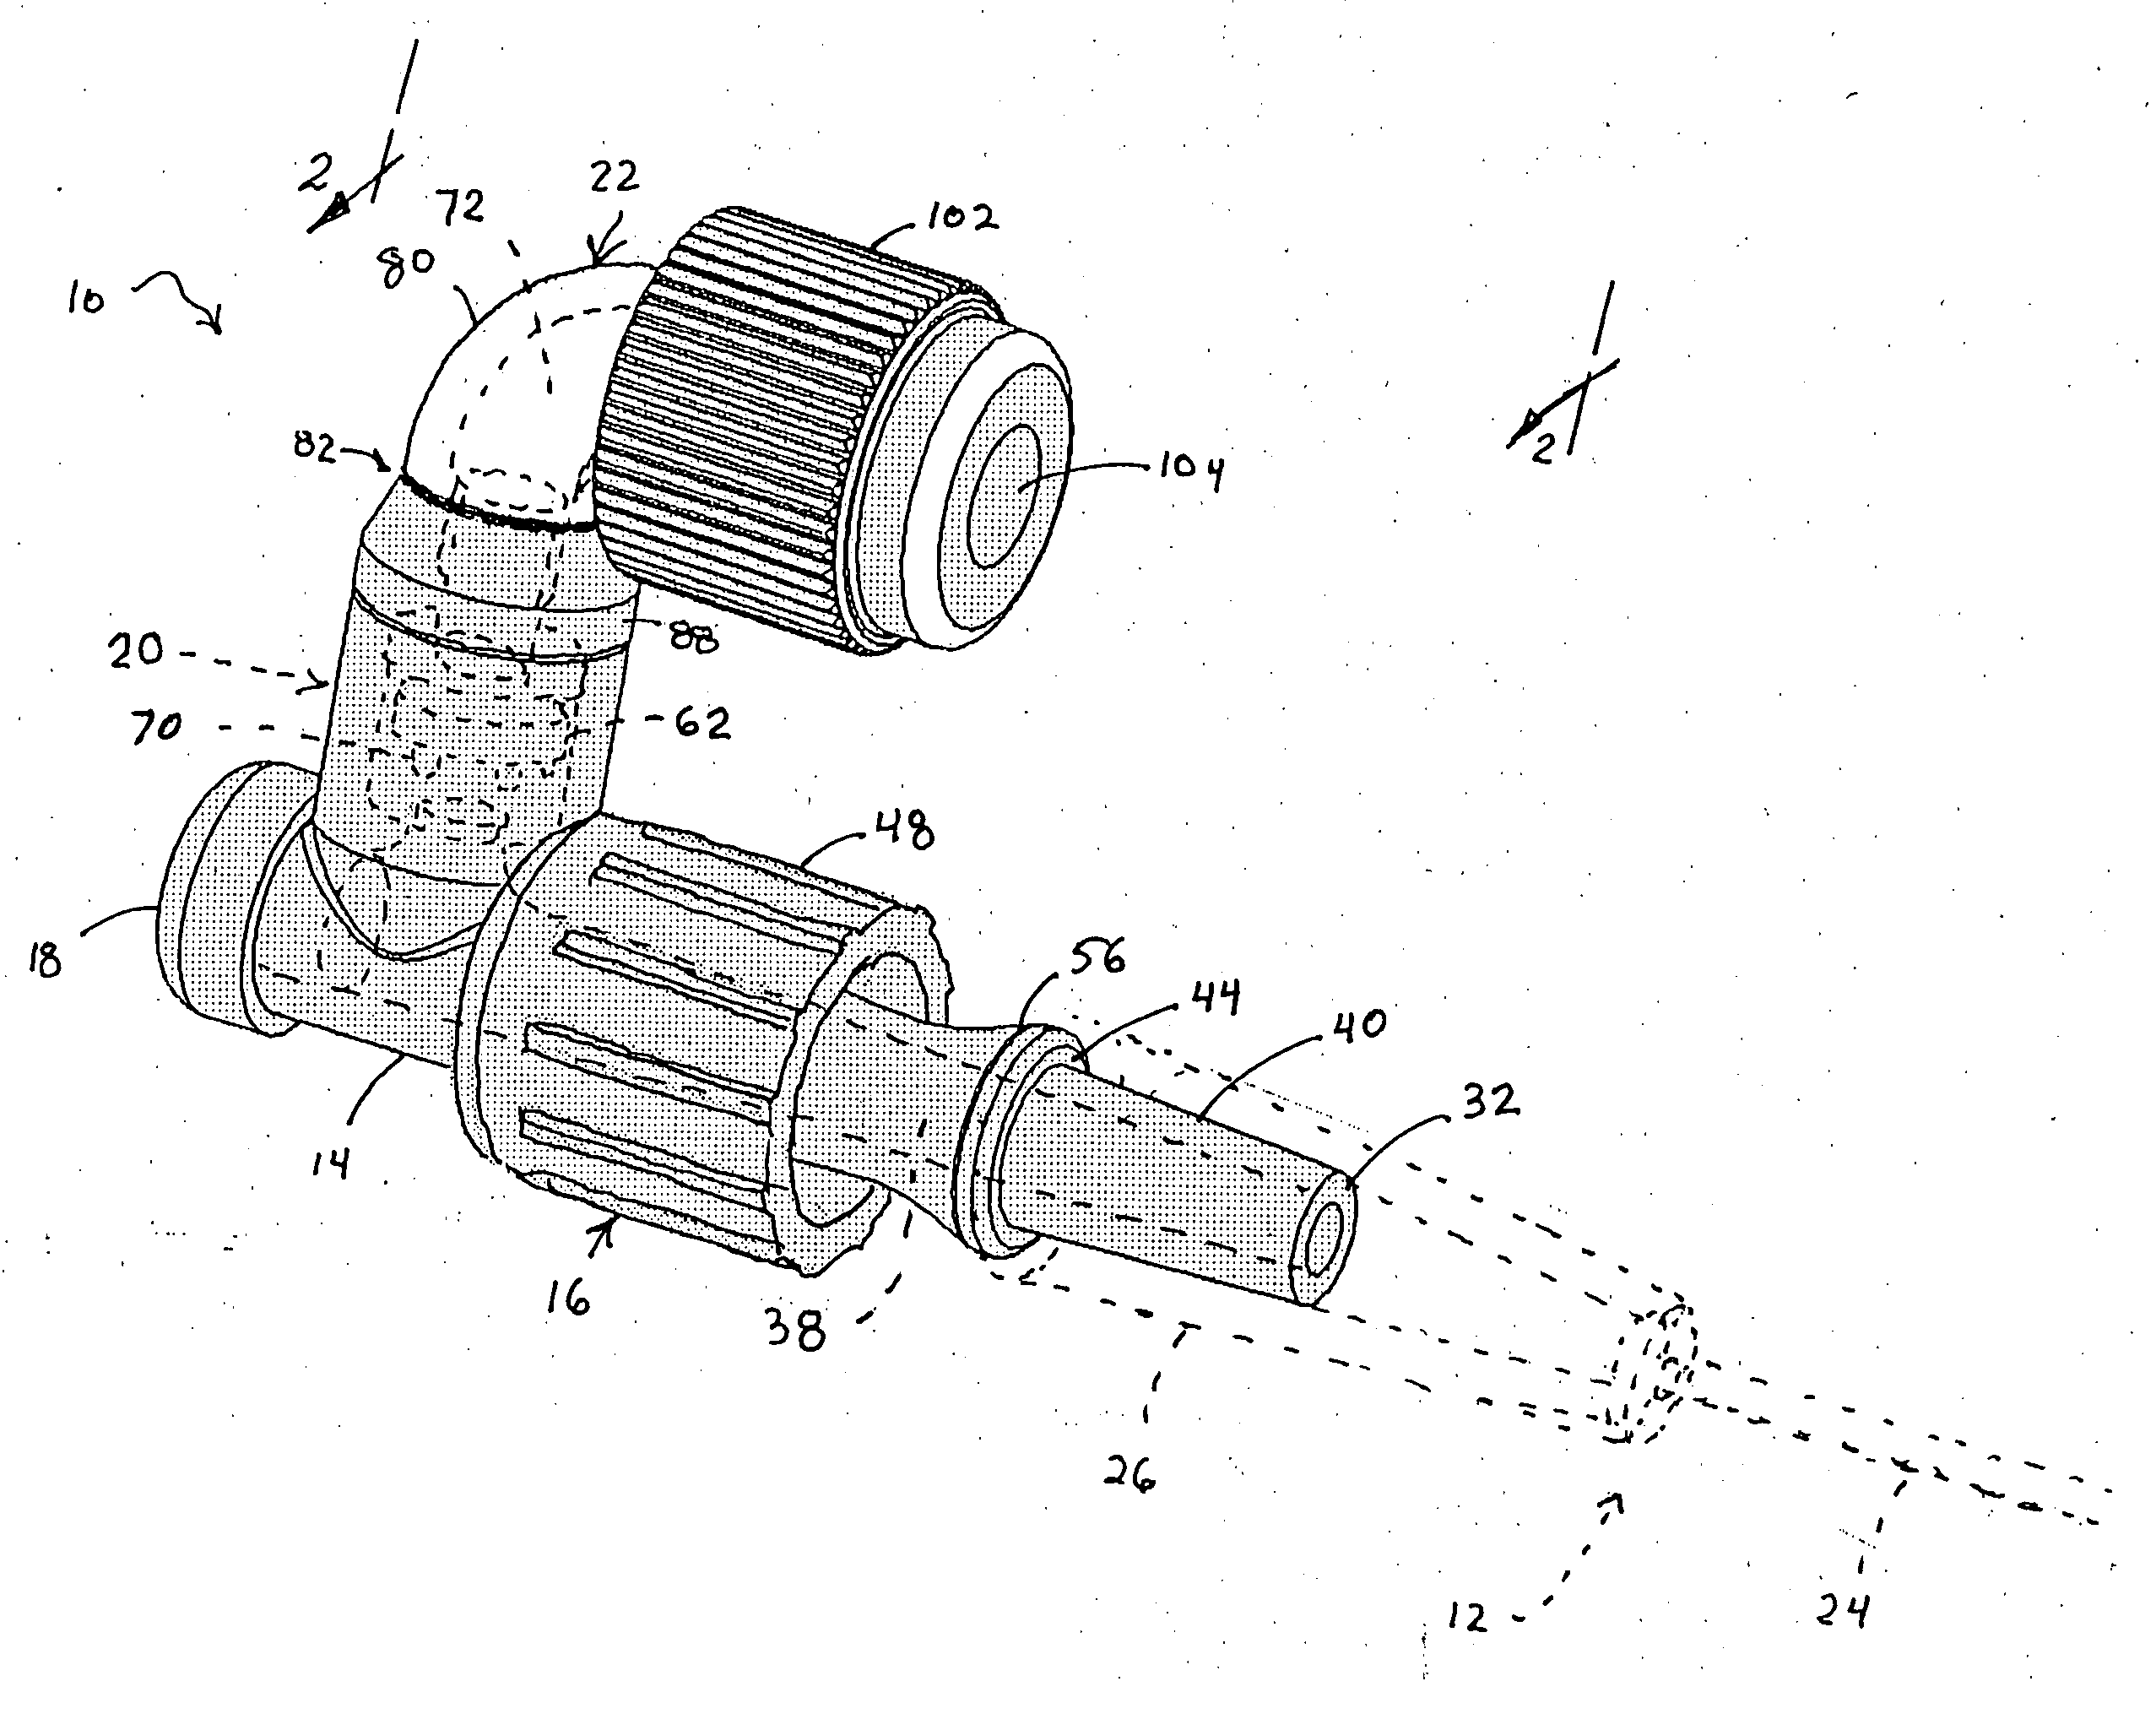 Vascular access device and method of using same